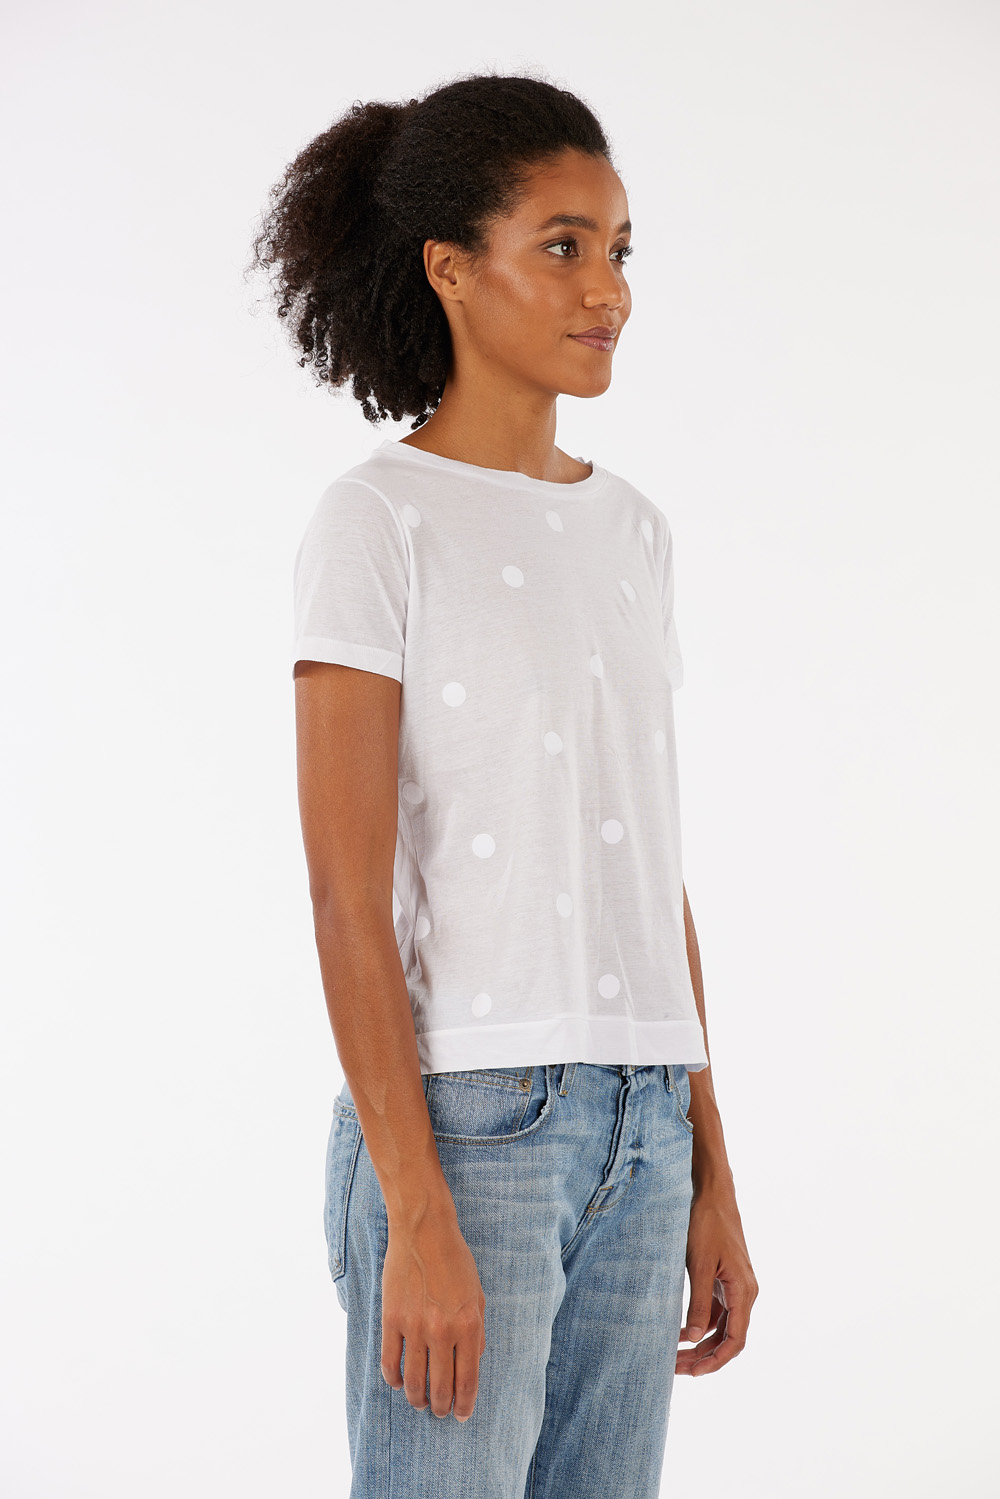 Boat neck T-shirt in 100% superfine cotton with tone-on-tone polka dots on the front